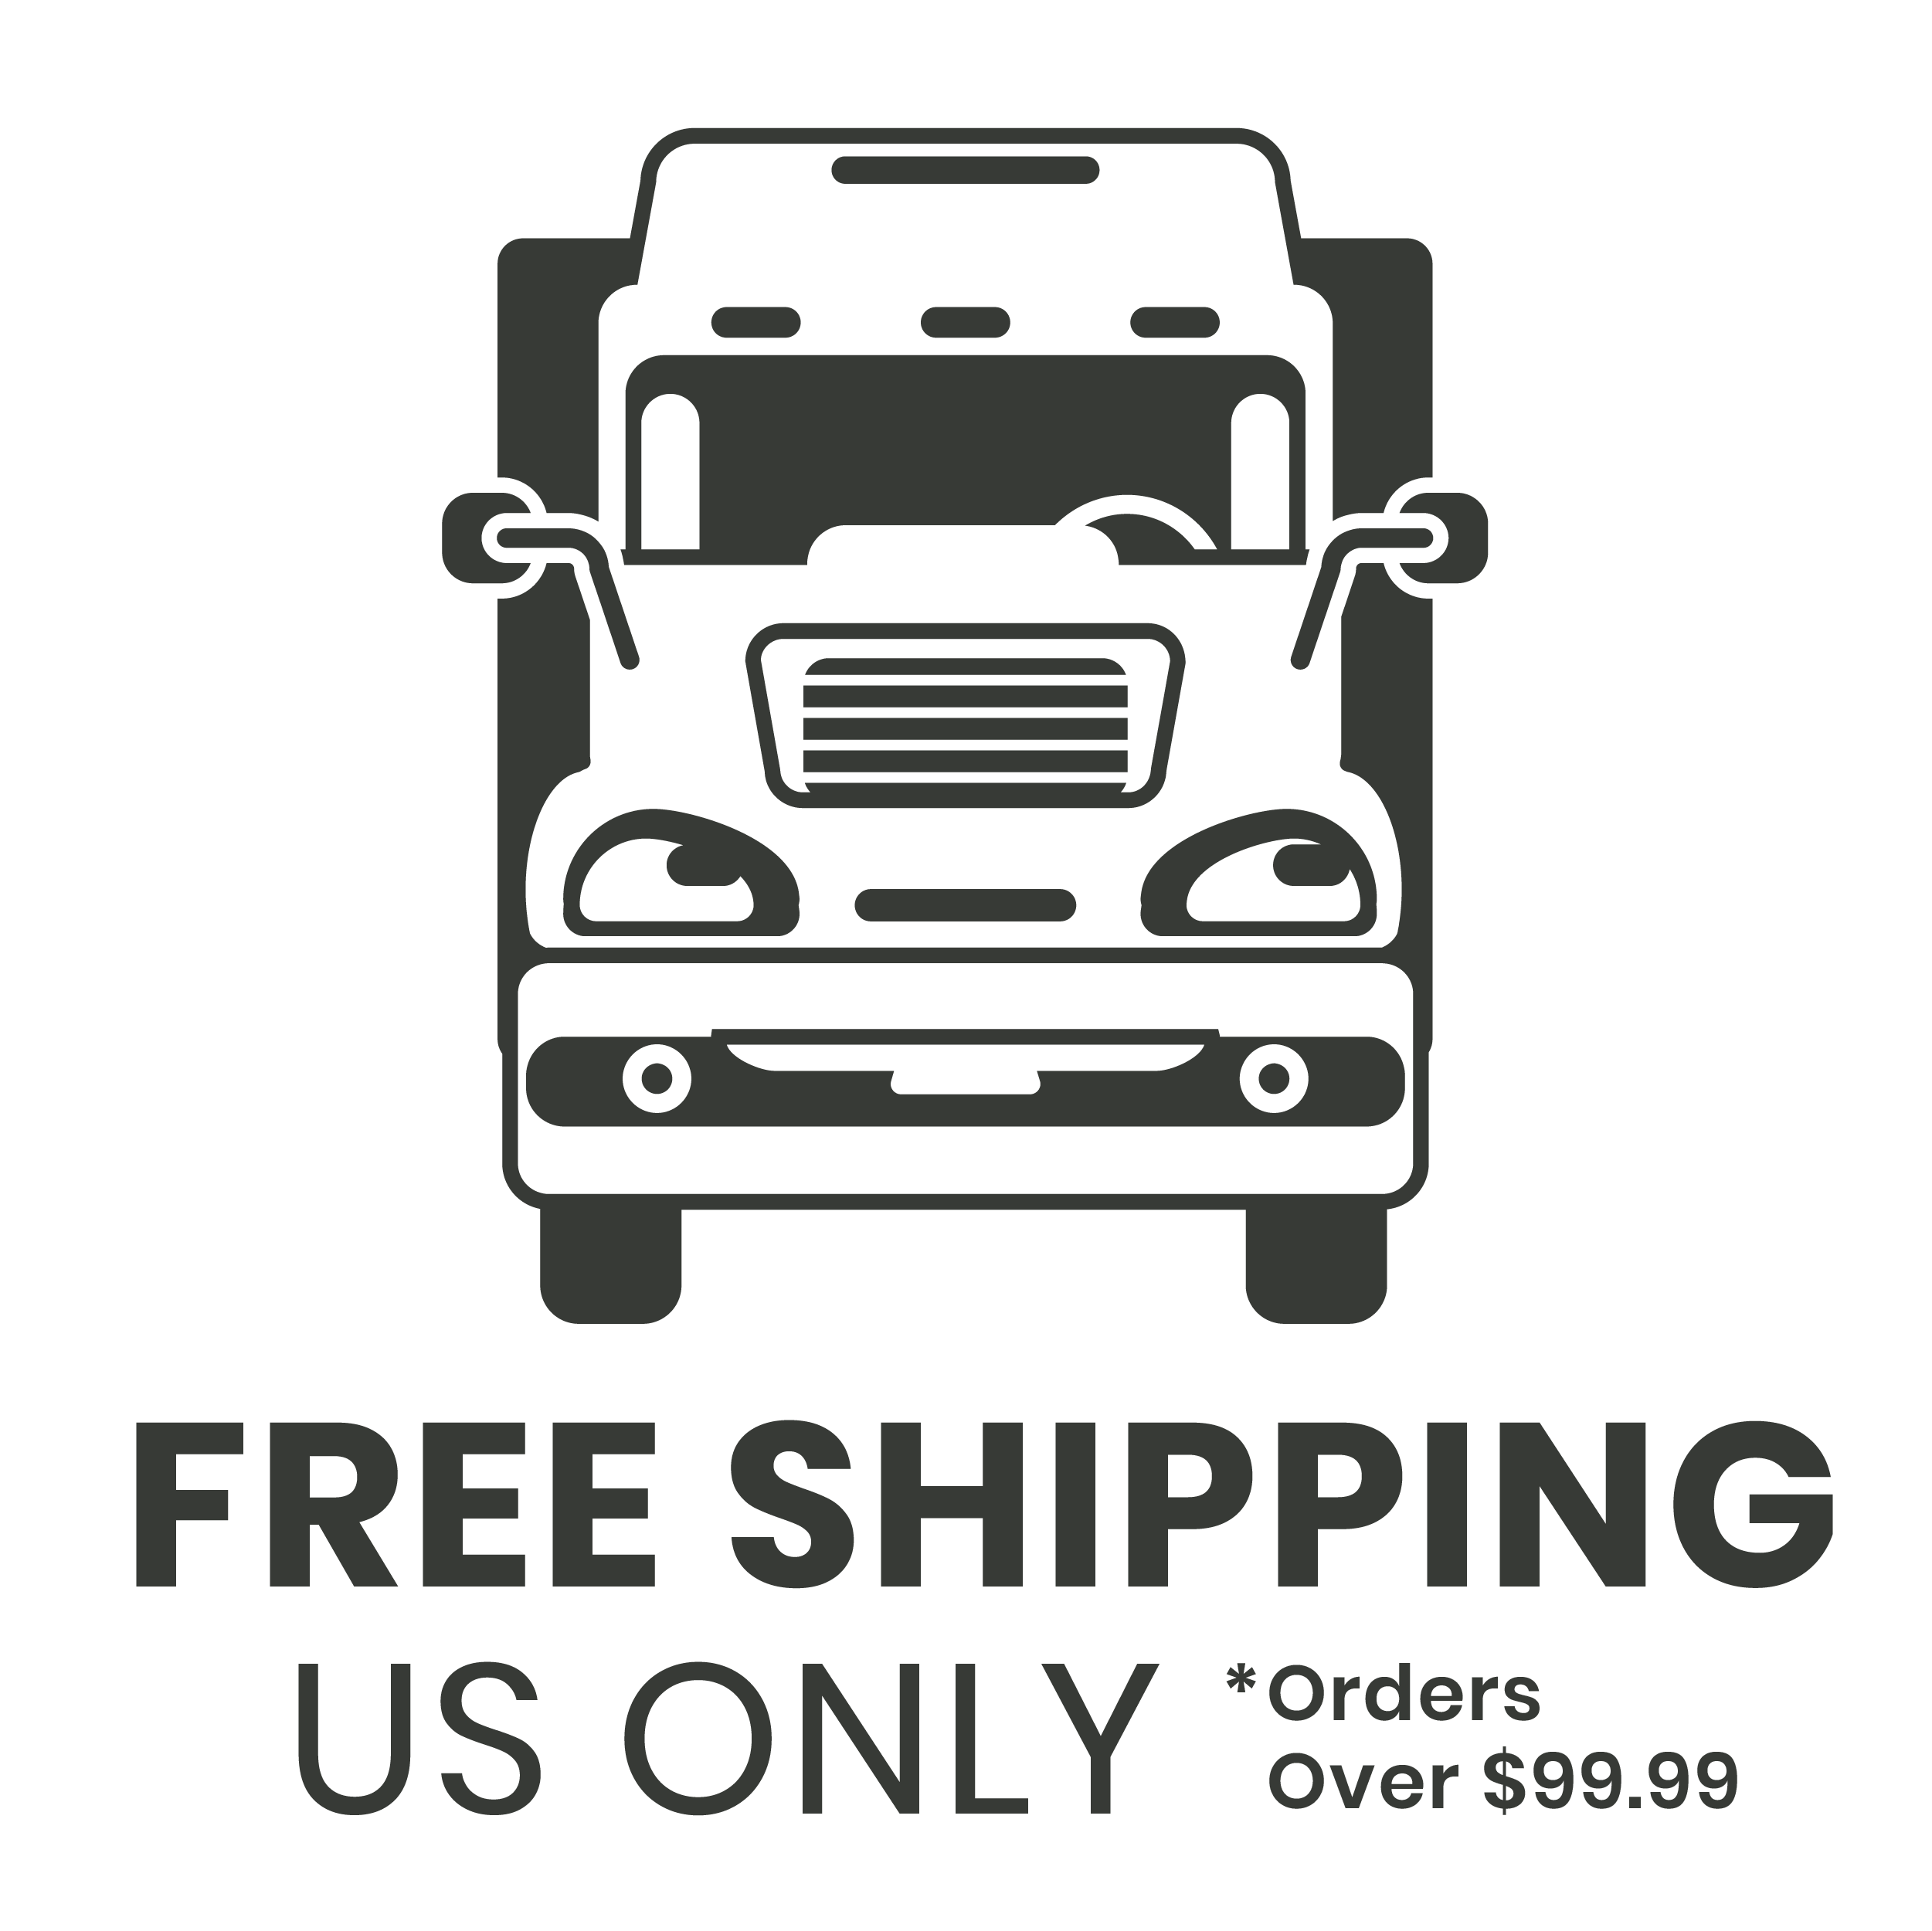 Free Shipping US Only